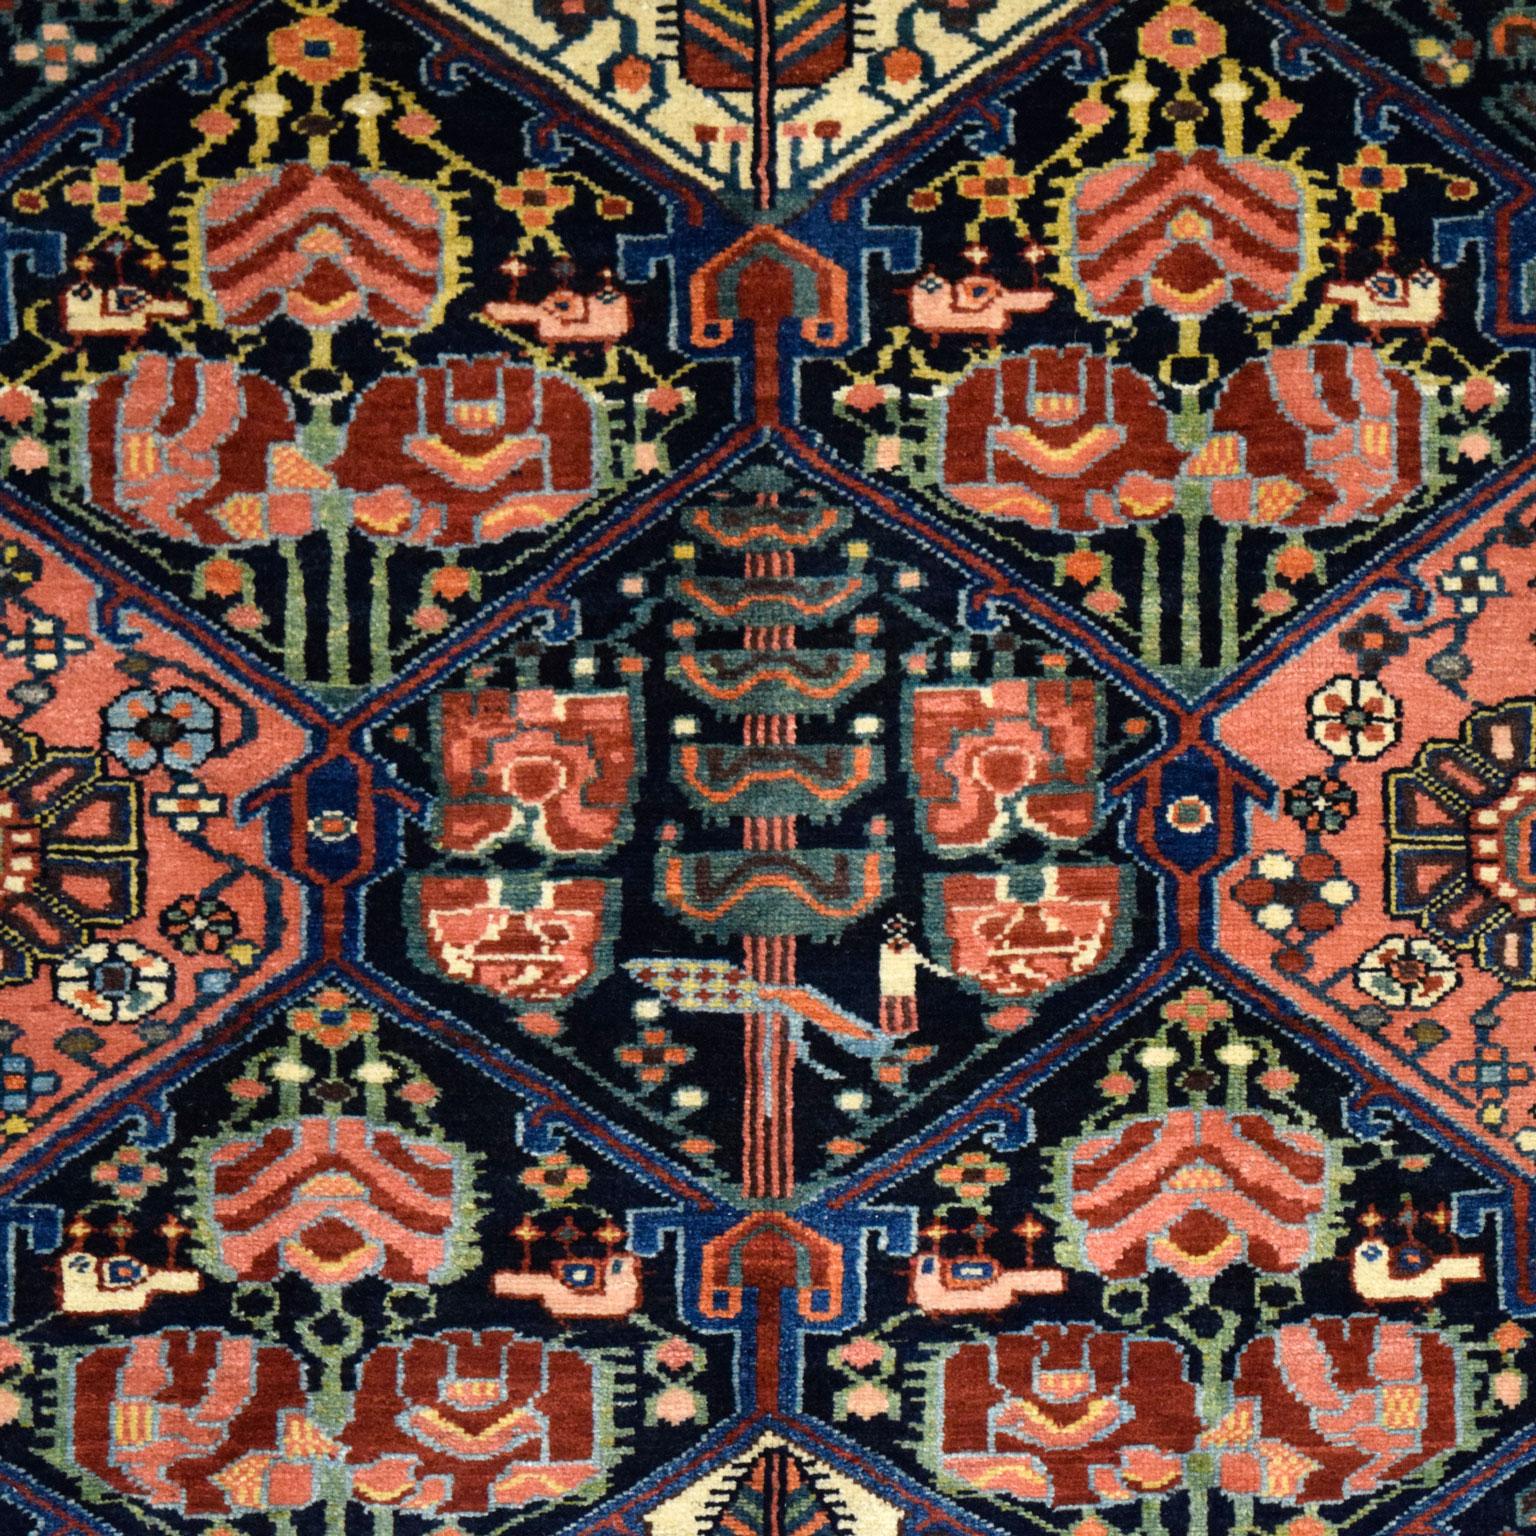 Woven in vibrant shades of red, blue, pink, cream, green, and gold wool, this Persian Bakhtiari carpet is hand-knotted in pure handspun wool and measures 4’6” x 7’0”. The hand-knotted construction utilizes a traditional Persian weave, which produces